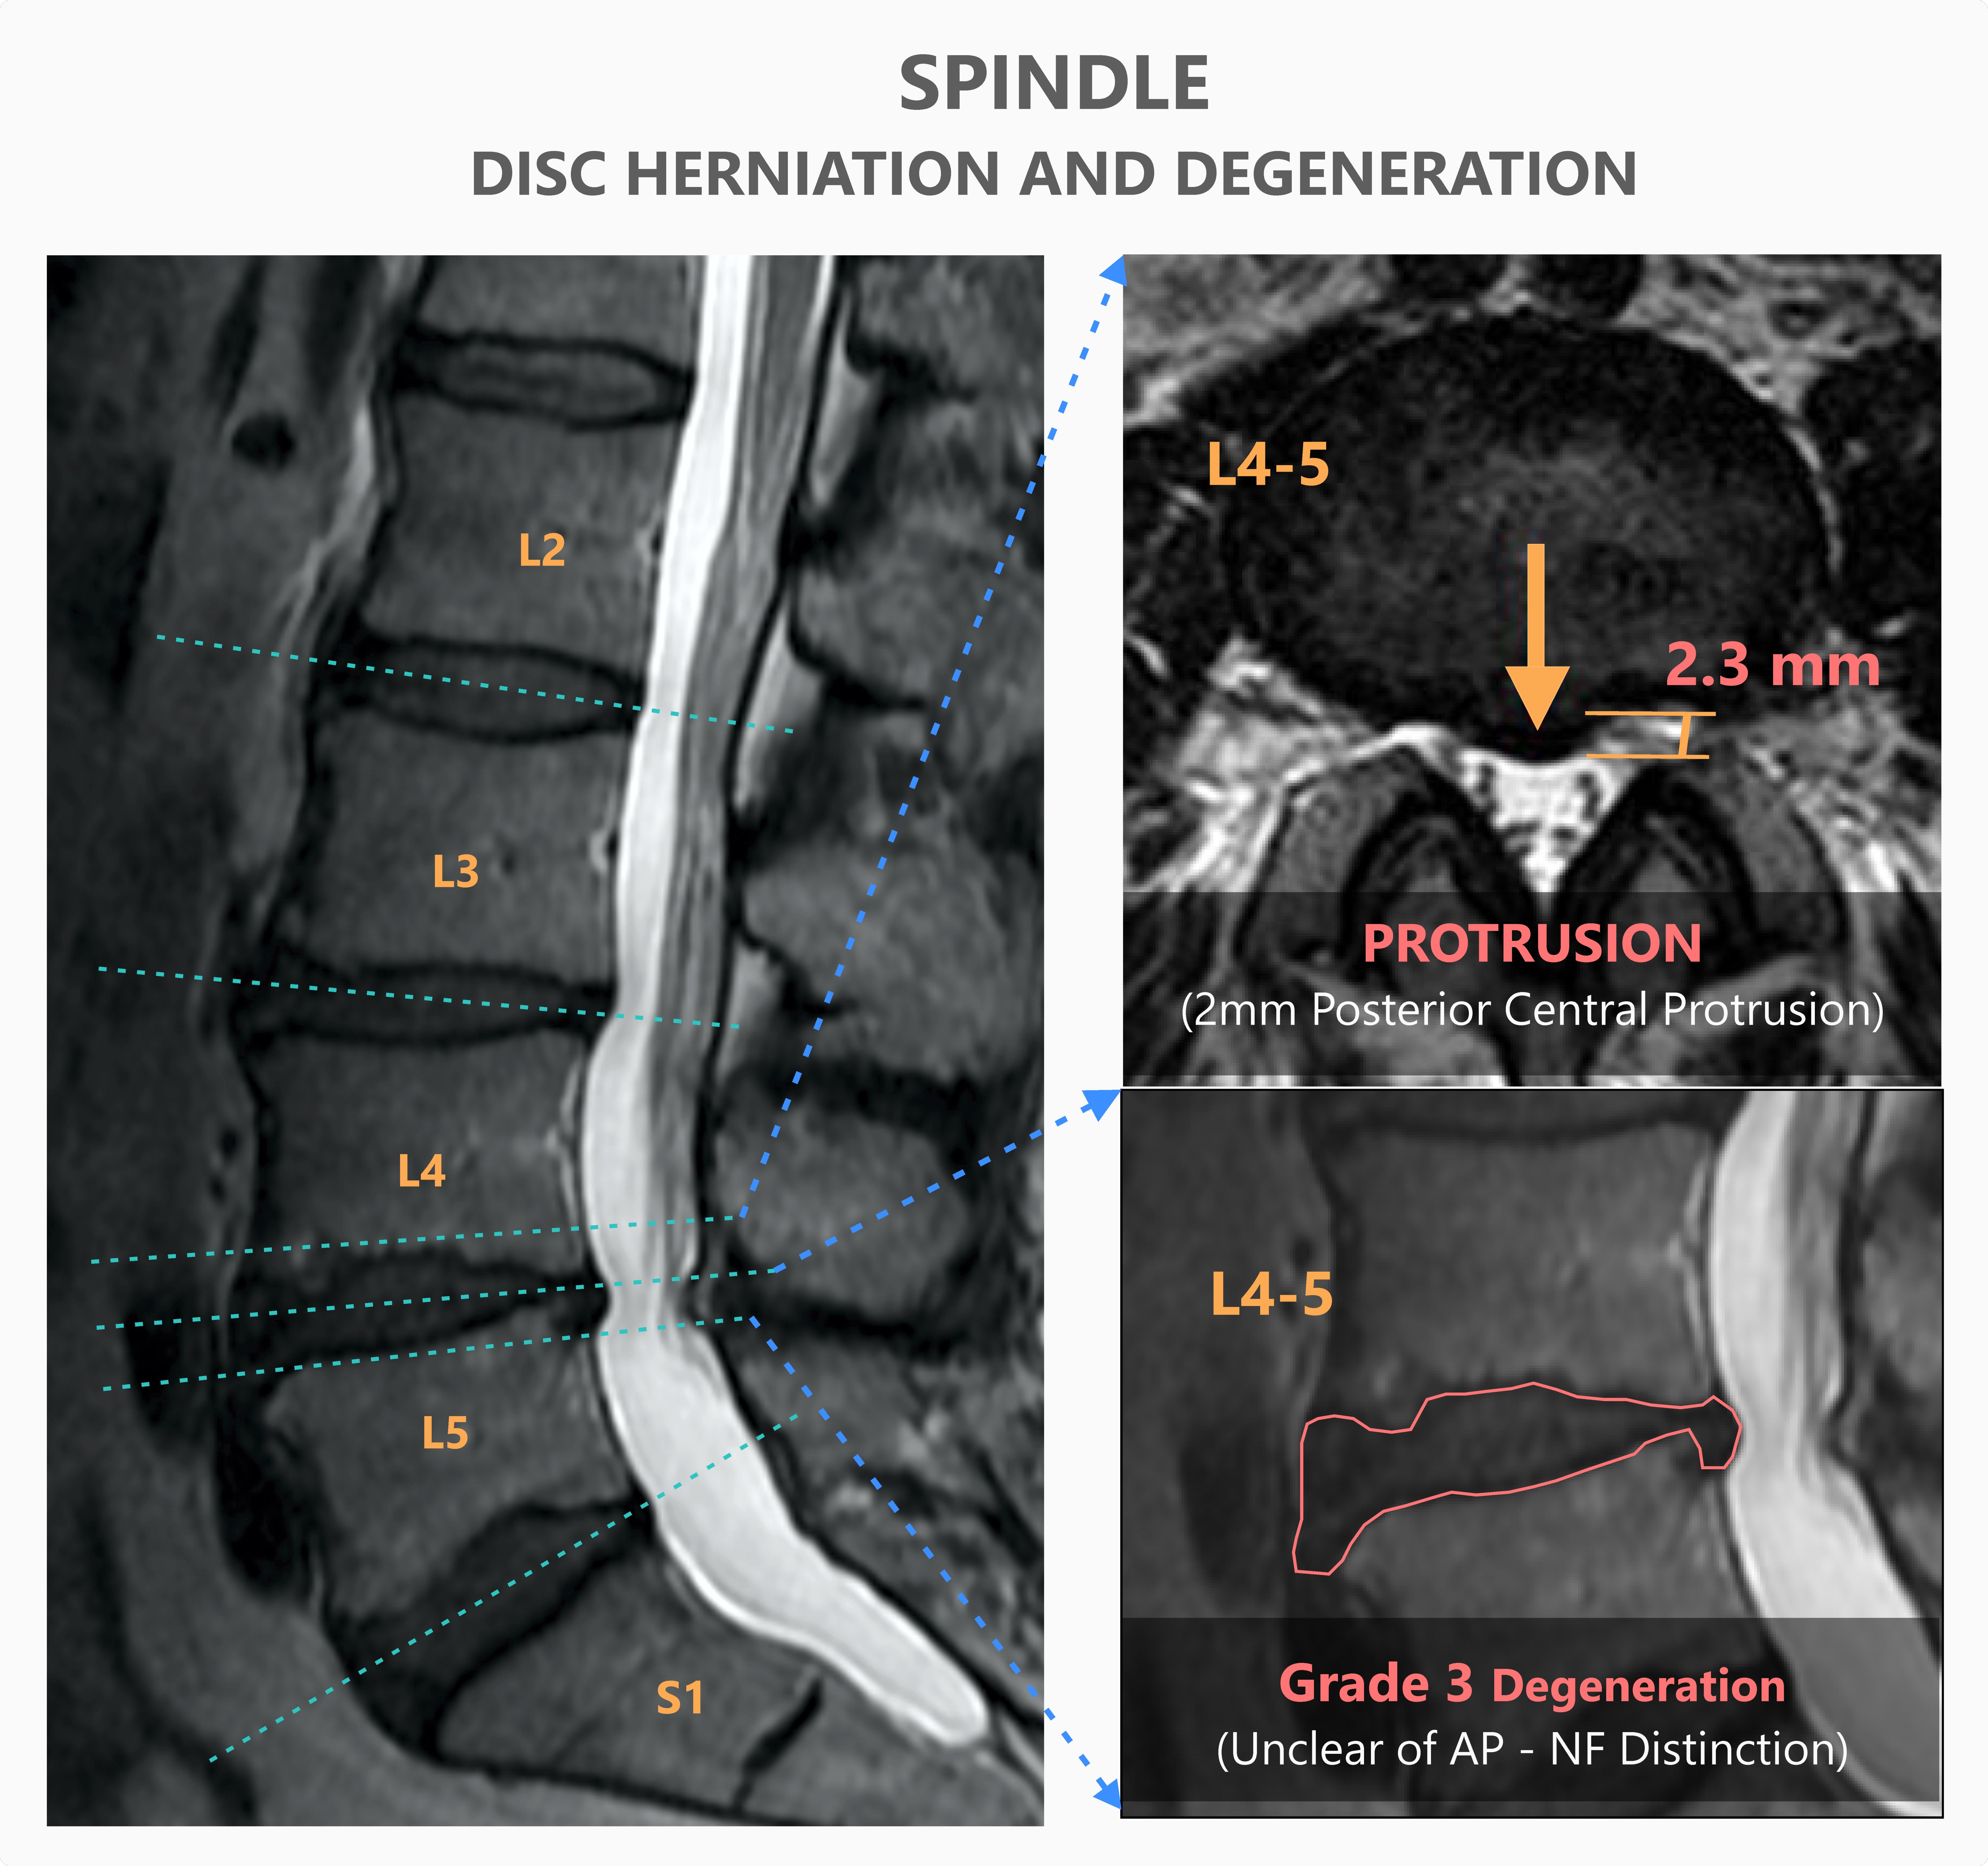 Grading of Spine degeneration and Measuring the extent of protrusion by Spindle